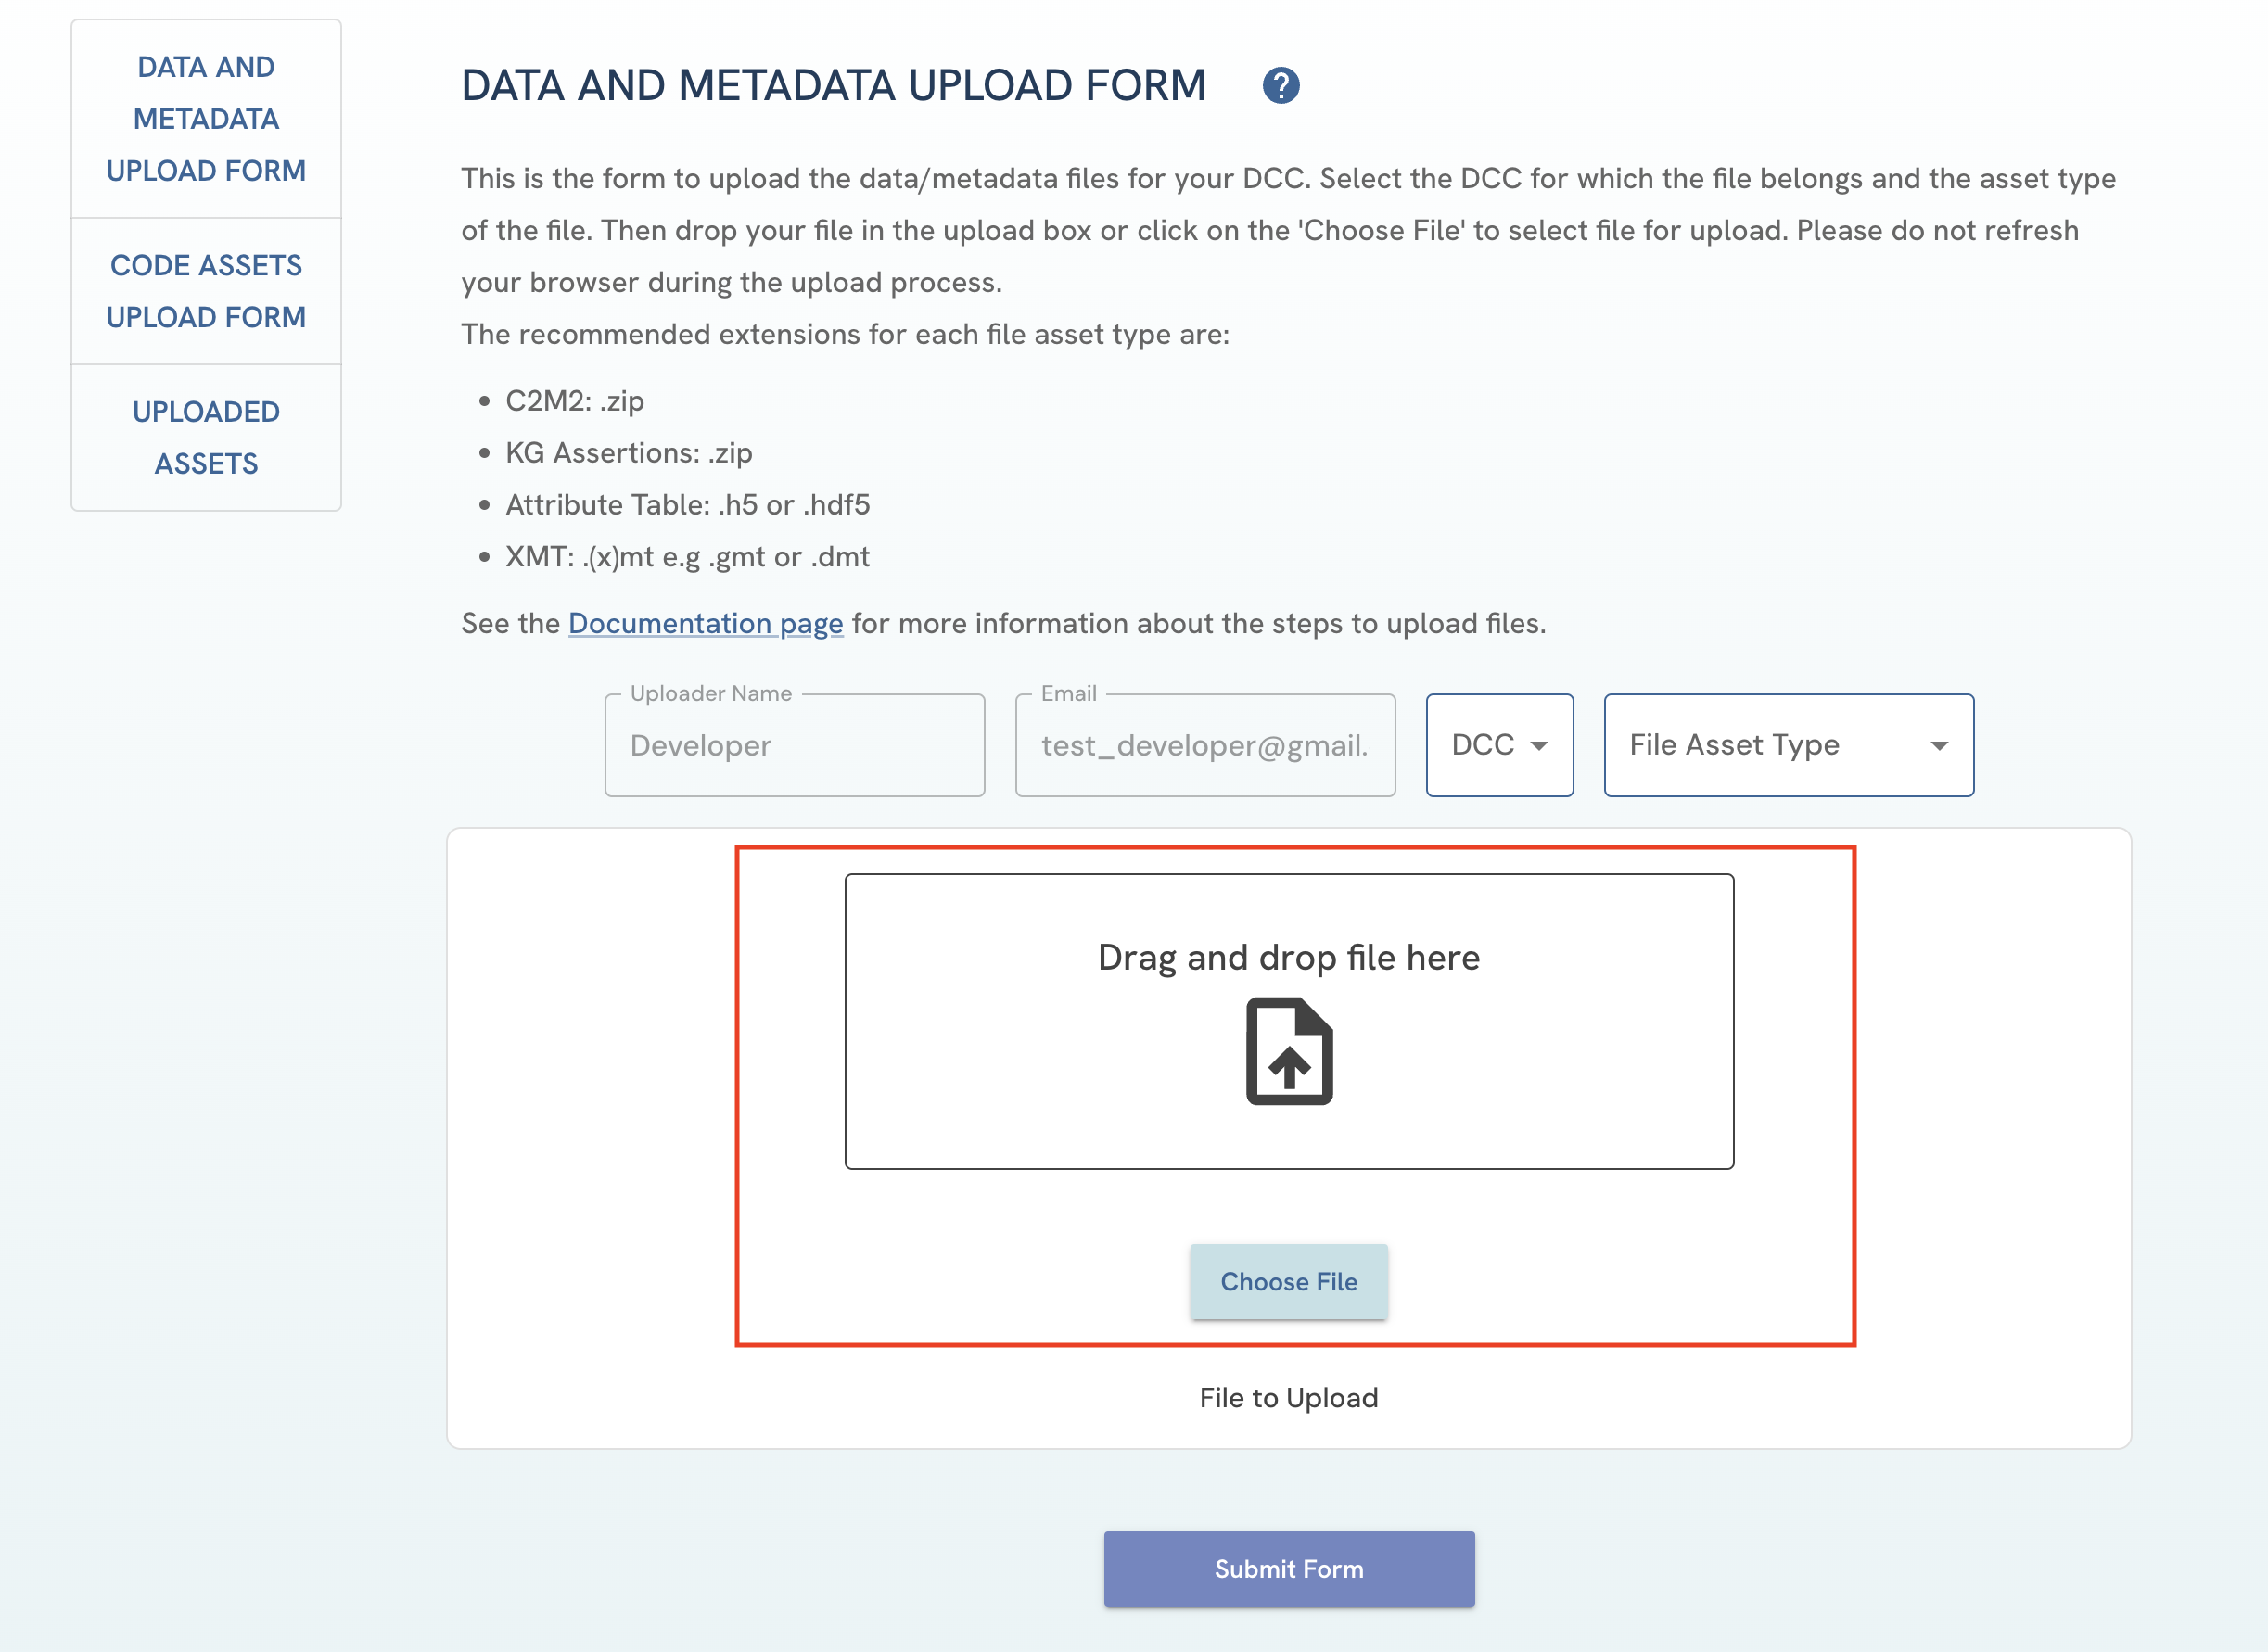 A screenshot of Data and Metadata Upload Form showing file selection